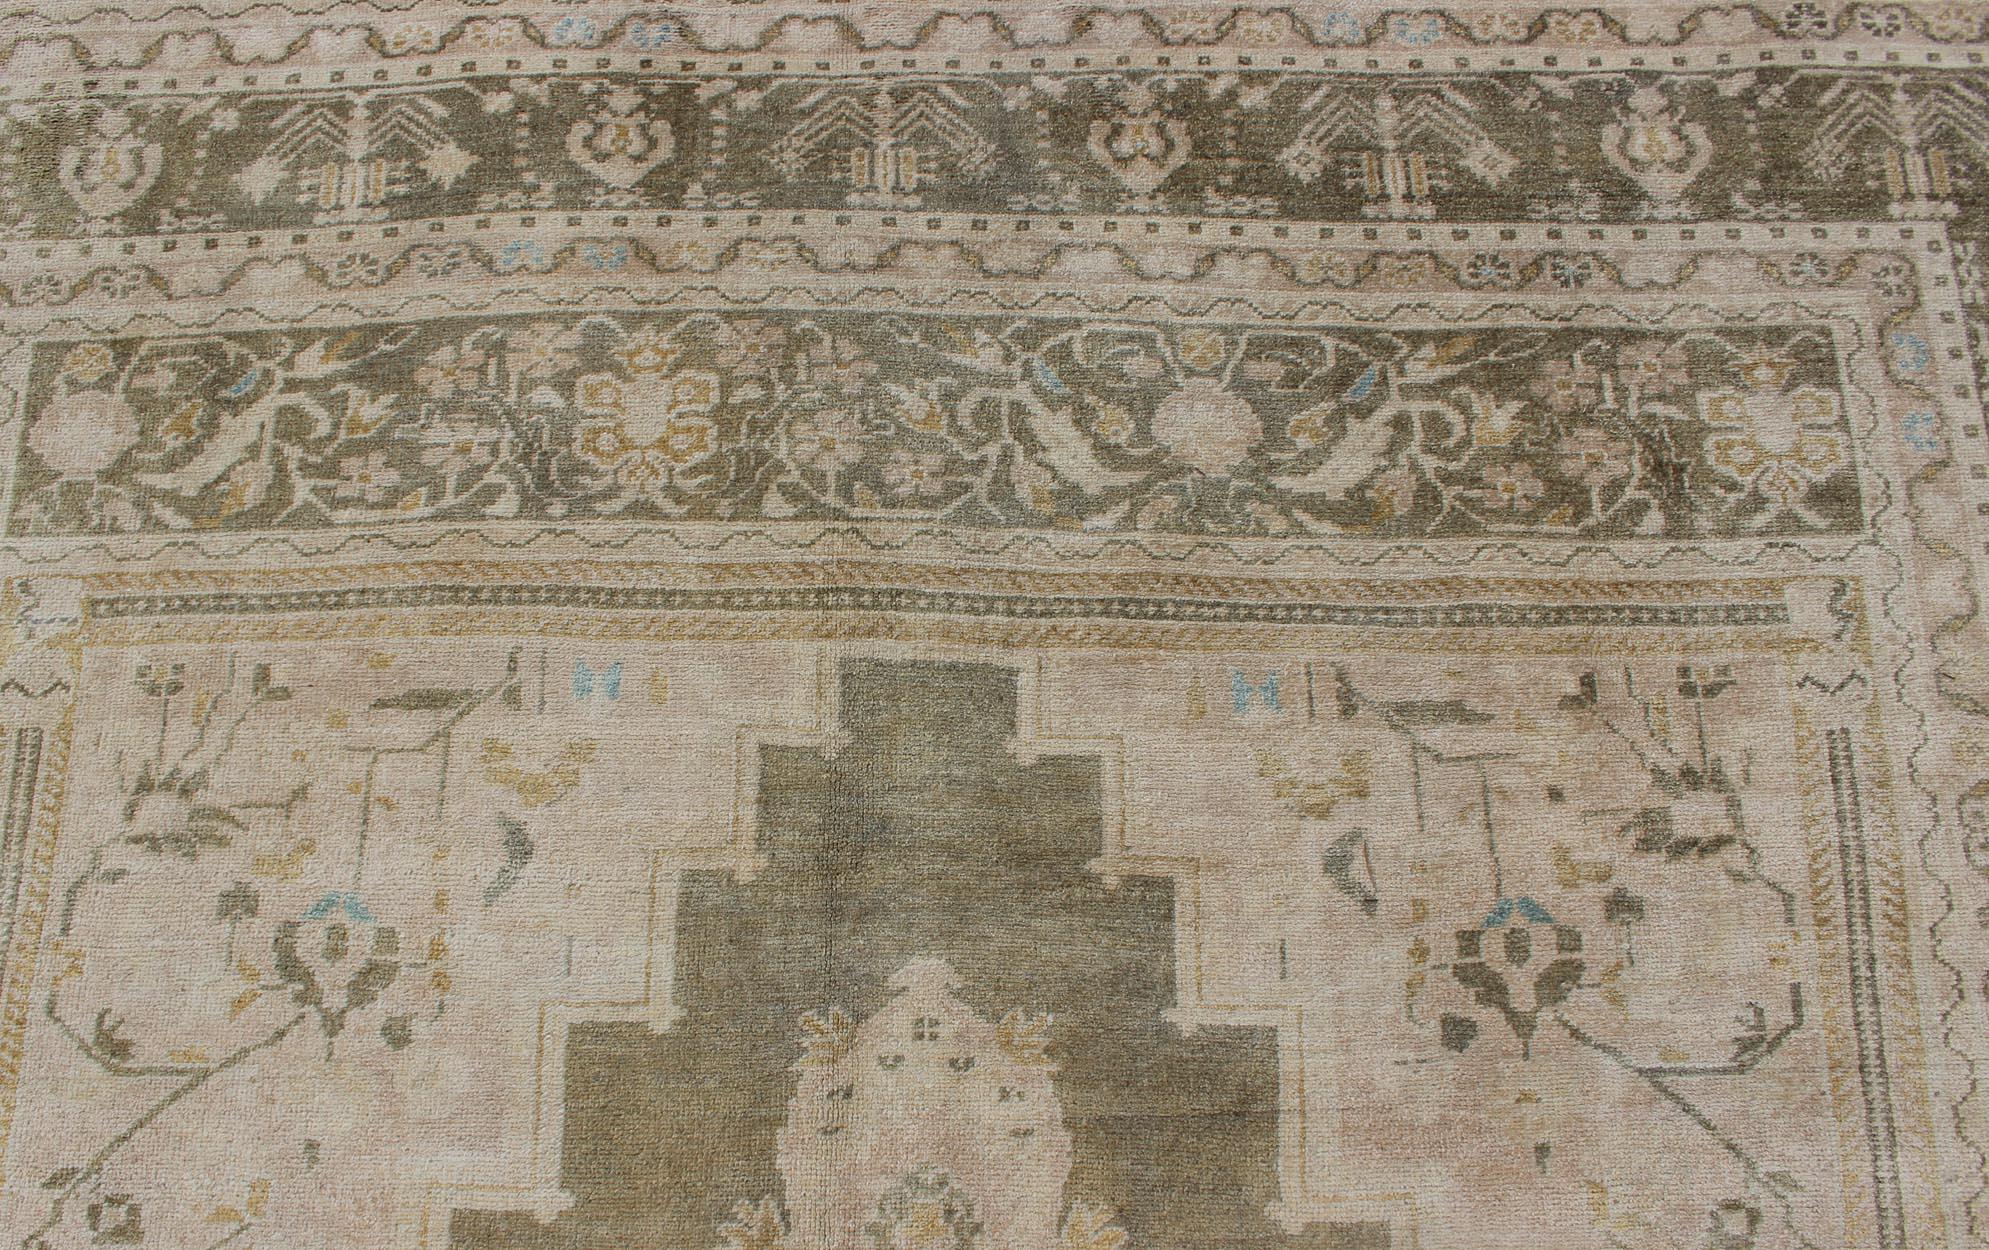 Medallion Vintage Turkish Oushak Rug in Olive Green, Army Green, Tan, Teal  In Good Condition For Sale In Atlanta, GA